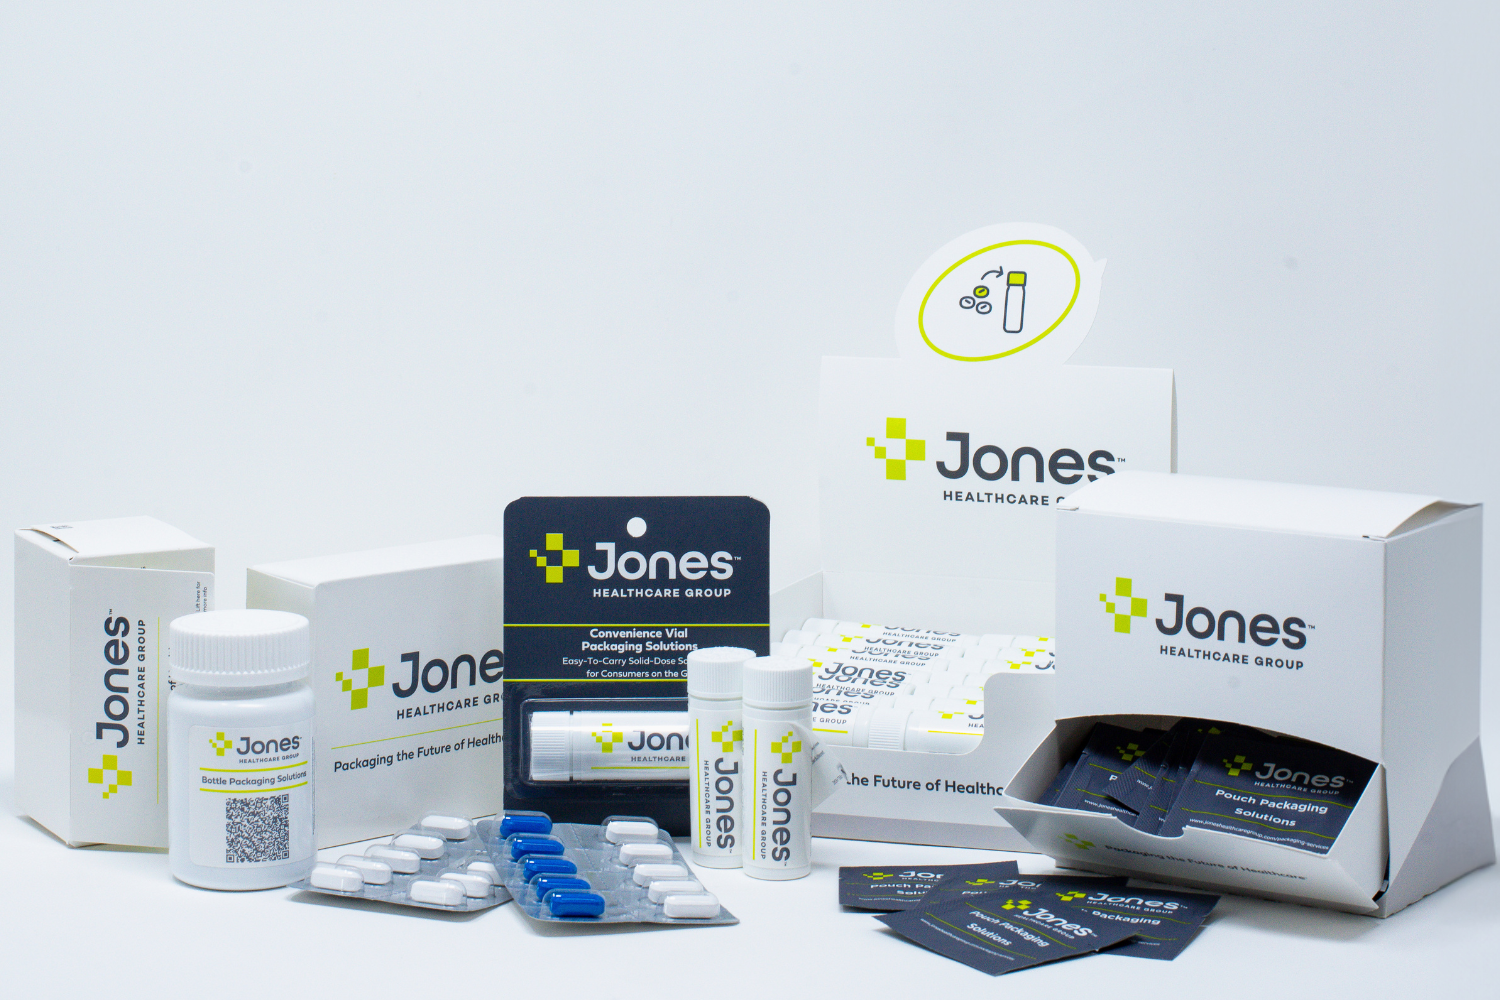 A display of various Jones Healthcare Group products including boxes of pills, blister packs, and bottles of medications, showcasing a range of pharmaceutical packaging.